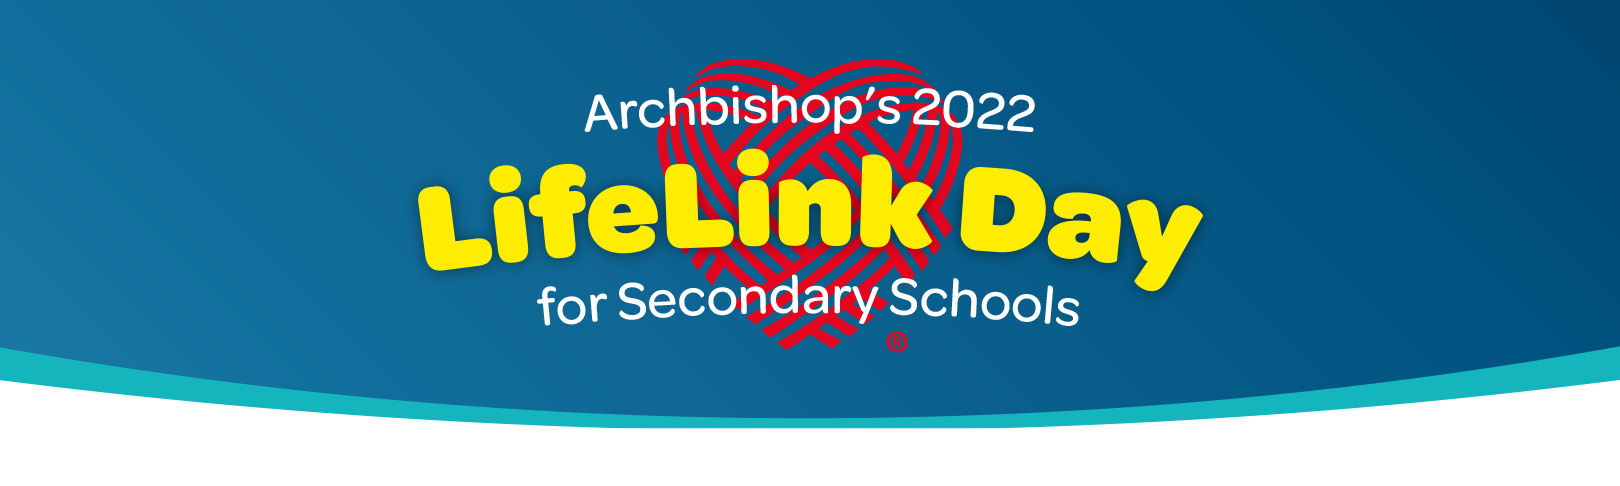 LifeLink Day 2022 for Secondary Schools